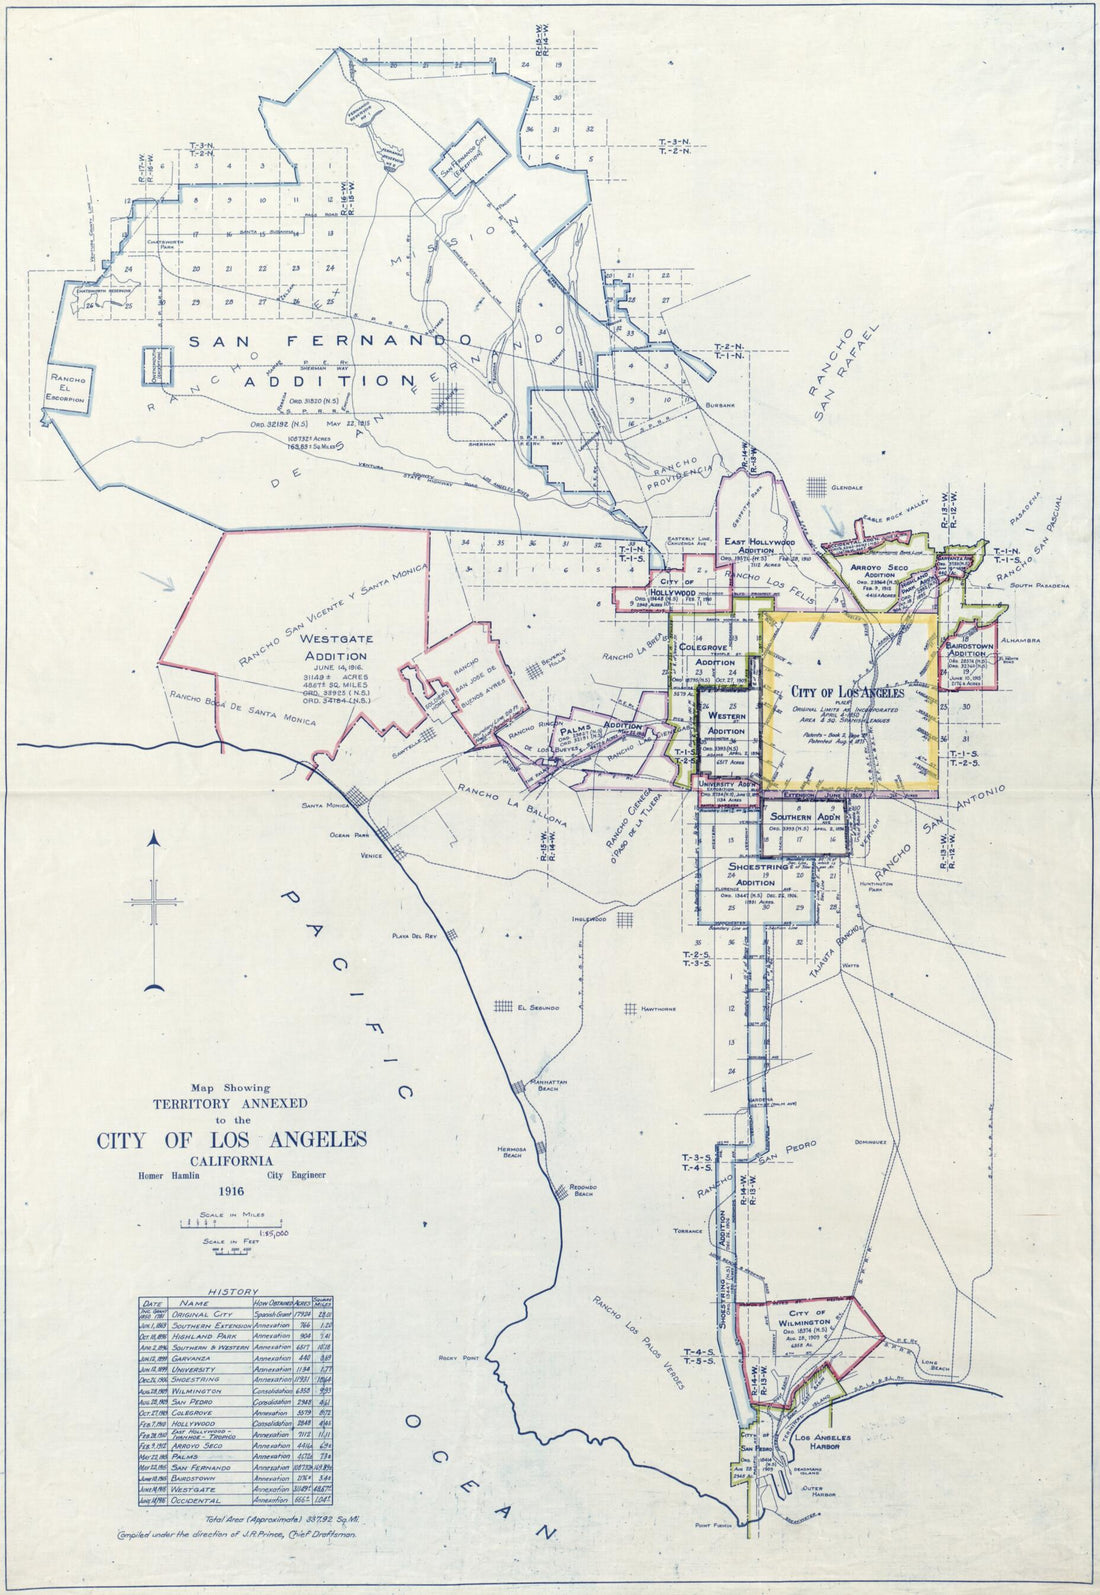 This old map of Map Showing Territory Annexed to the City of Los Angeles, California from 1916 was created by Homer Hamlin in 1916